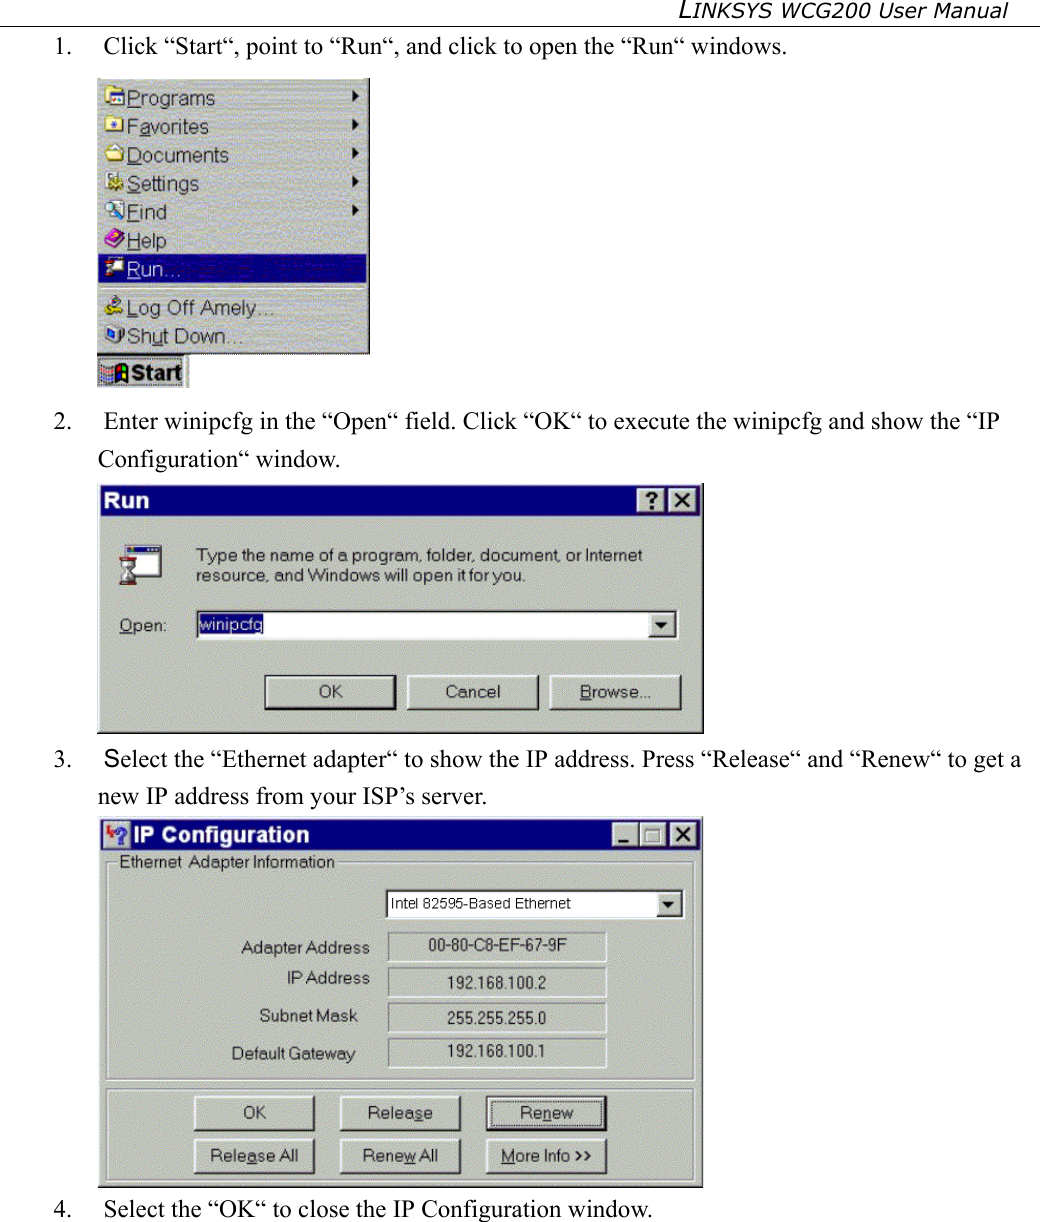 LINKSYS WCG200 User Manual   1. Click “Start“, point to “Run“, and click to open the “Run“ windows.  2.  Enter winipcfg in the “Open“ field. Click “OK“ to execute the winipcfg and show the “IP Configuration“ window.  3.  Select the “Ethernet adapter“ to show the IP address. Press “Release“ and “Renew“ to get a new IP address from your ISP’s server.  4.  Select the “OK“ to close the IP Configuration window.        